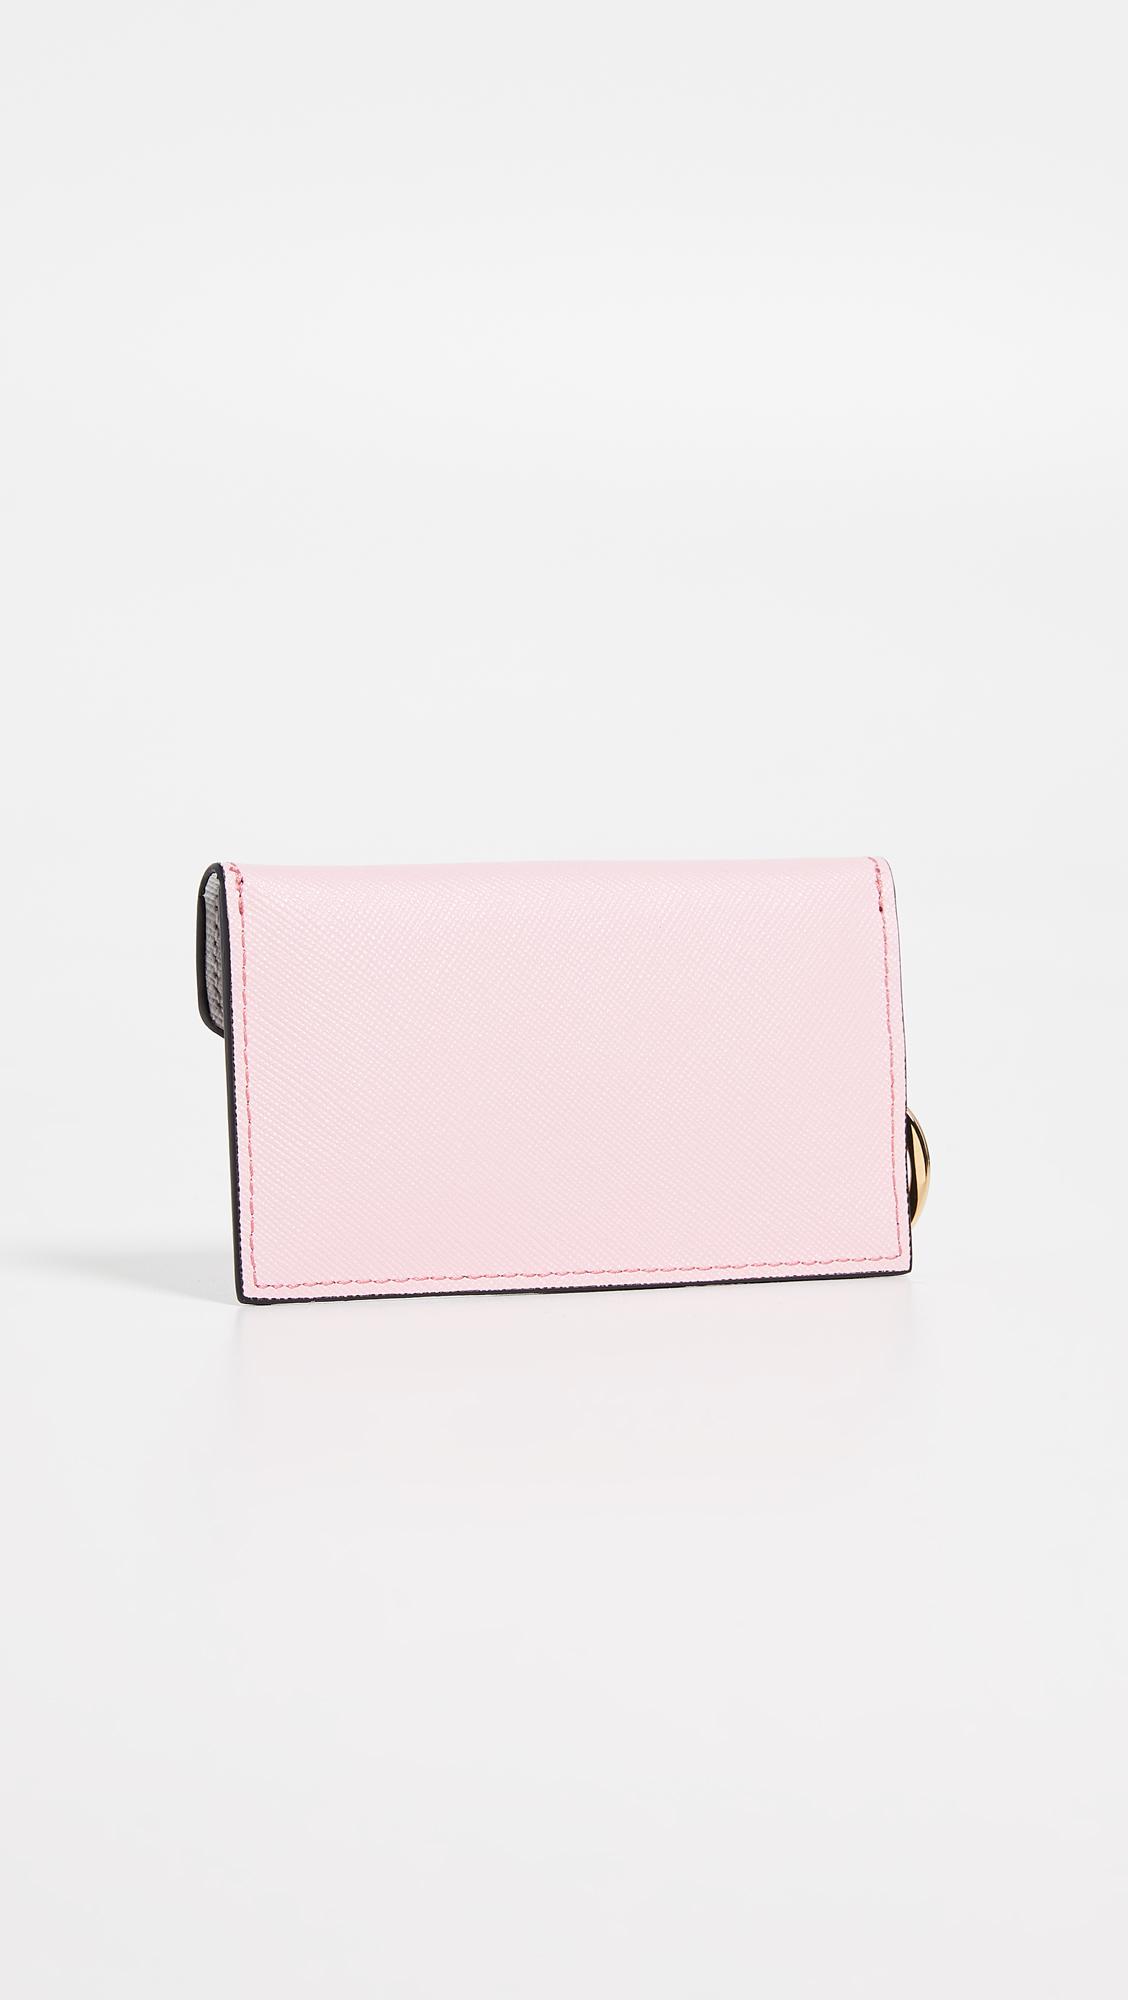 Marni Key Ring Card Case in Pink | Lyst